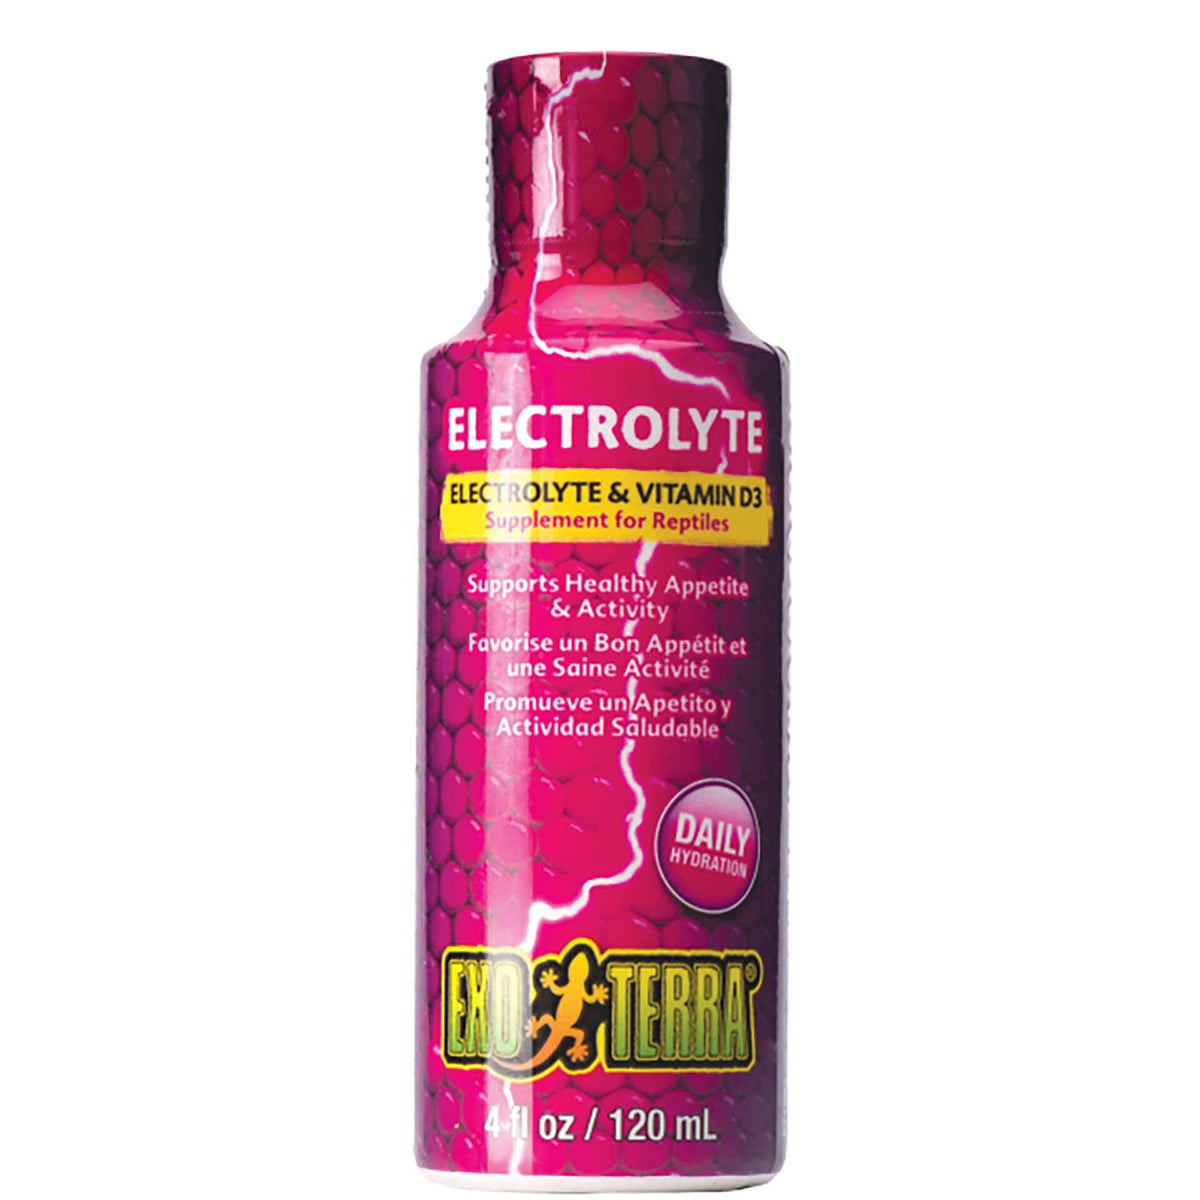 Exo Terra Electrolyte and Vitamin D3 Supplement 120ml